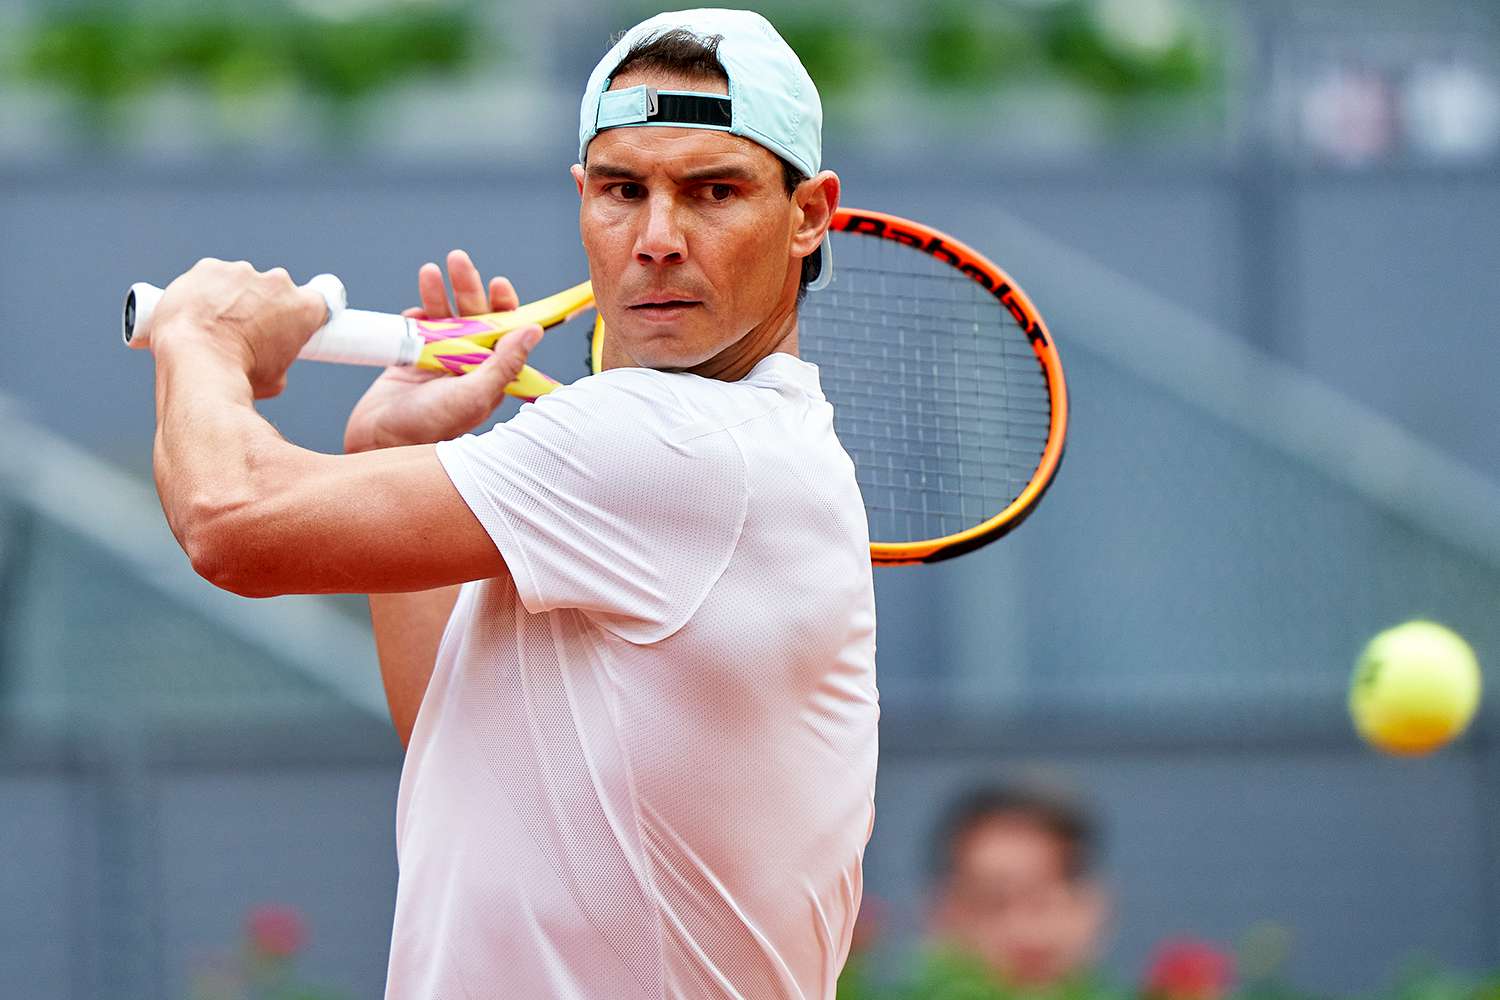 Rafael Nadal Advances to 2022 French Open Final After Opponent's Leg Injury: 'Very Sad for Him'